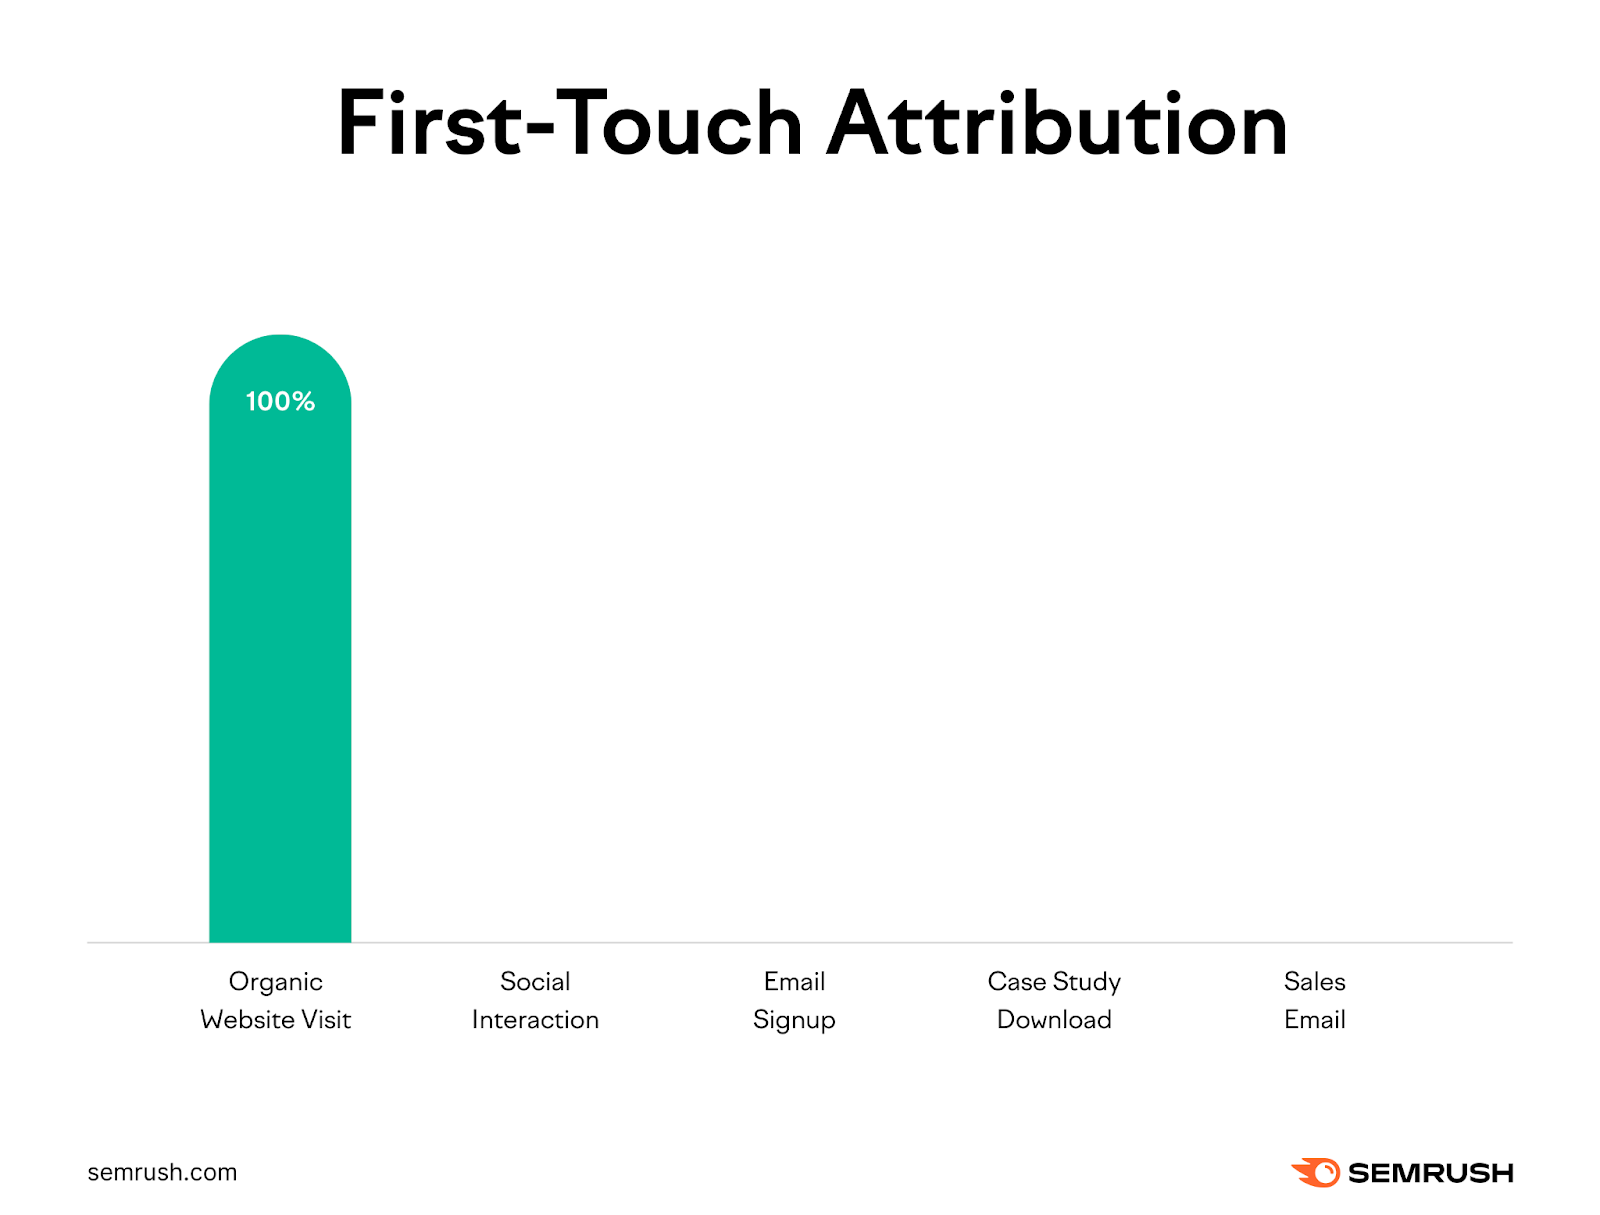 First-touch attribution assigns each  recognition  to the archetypal  touchpoint.